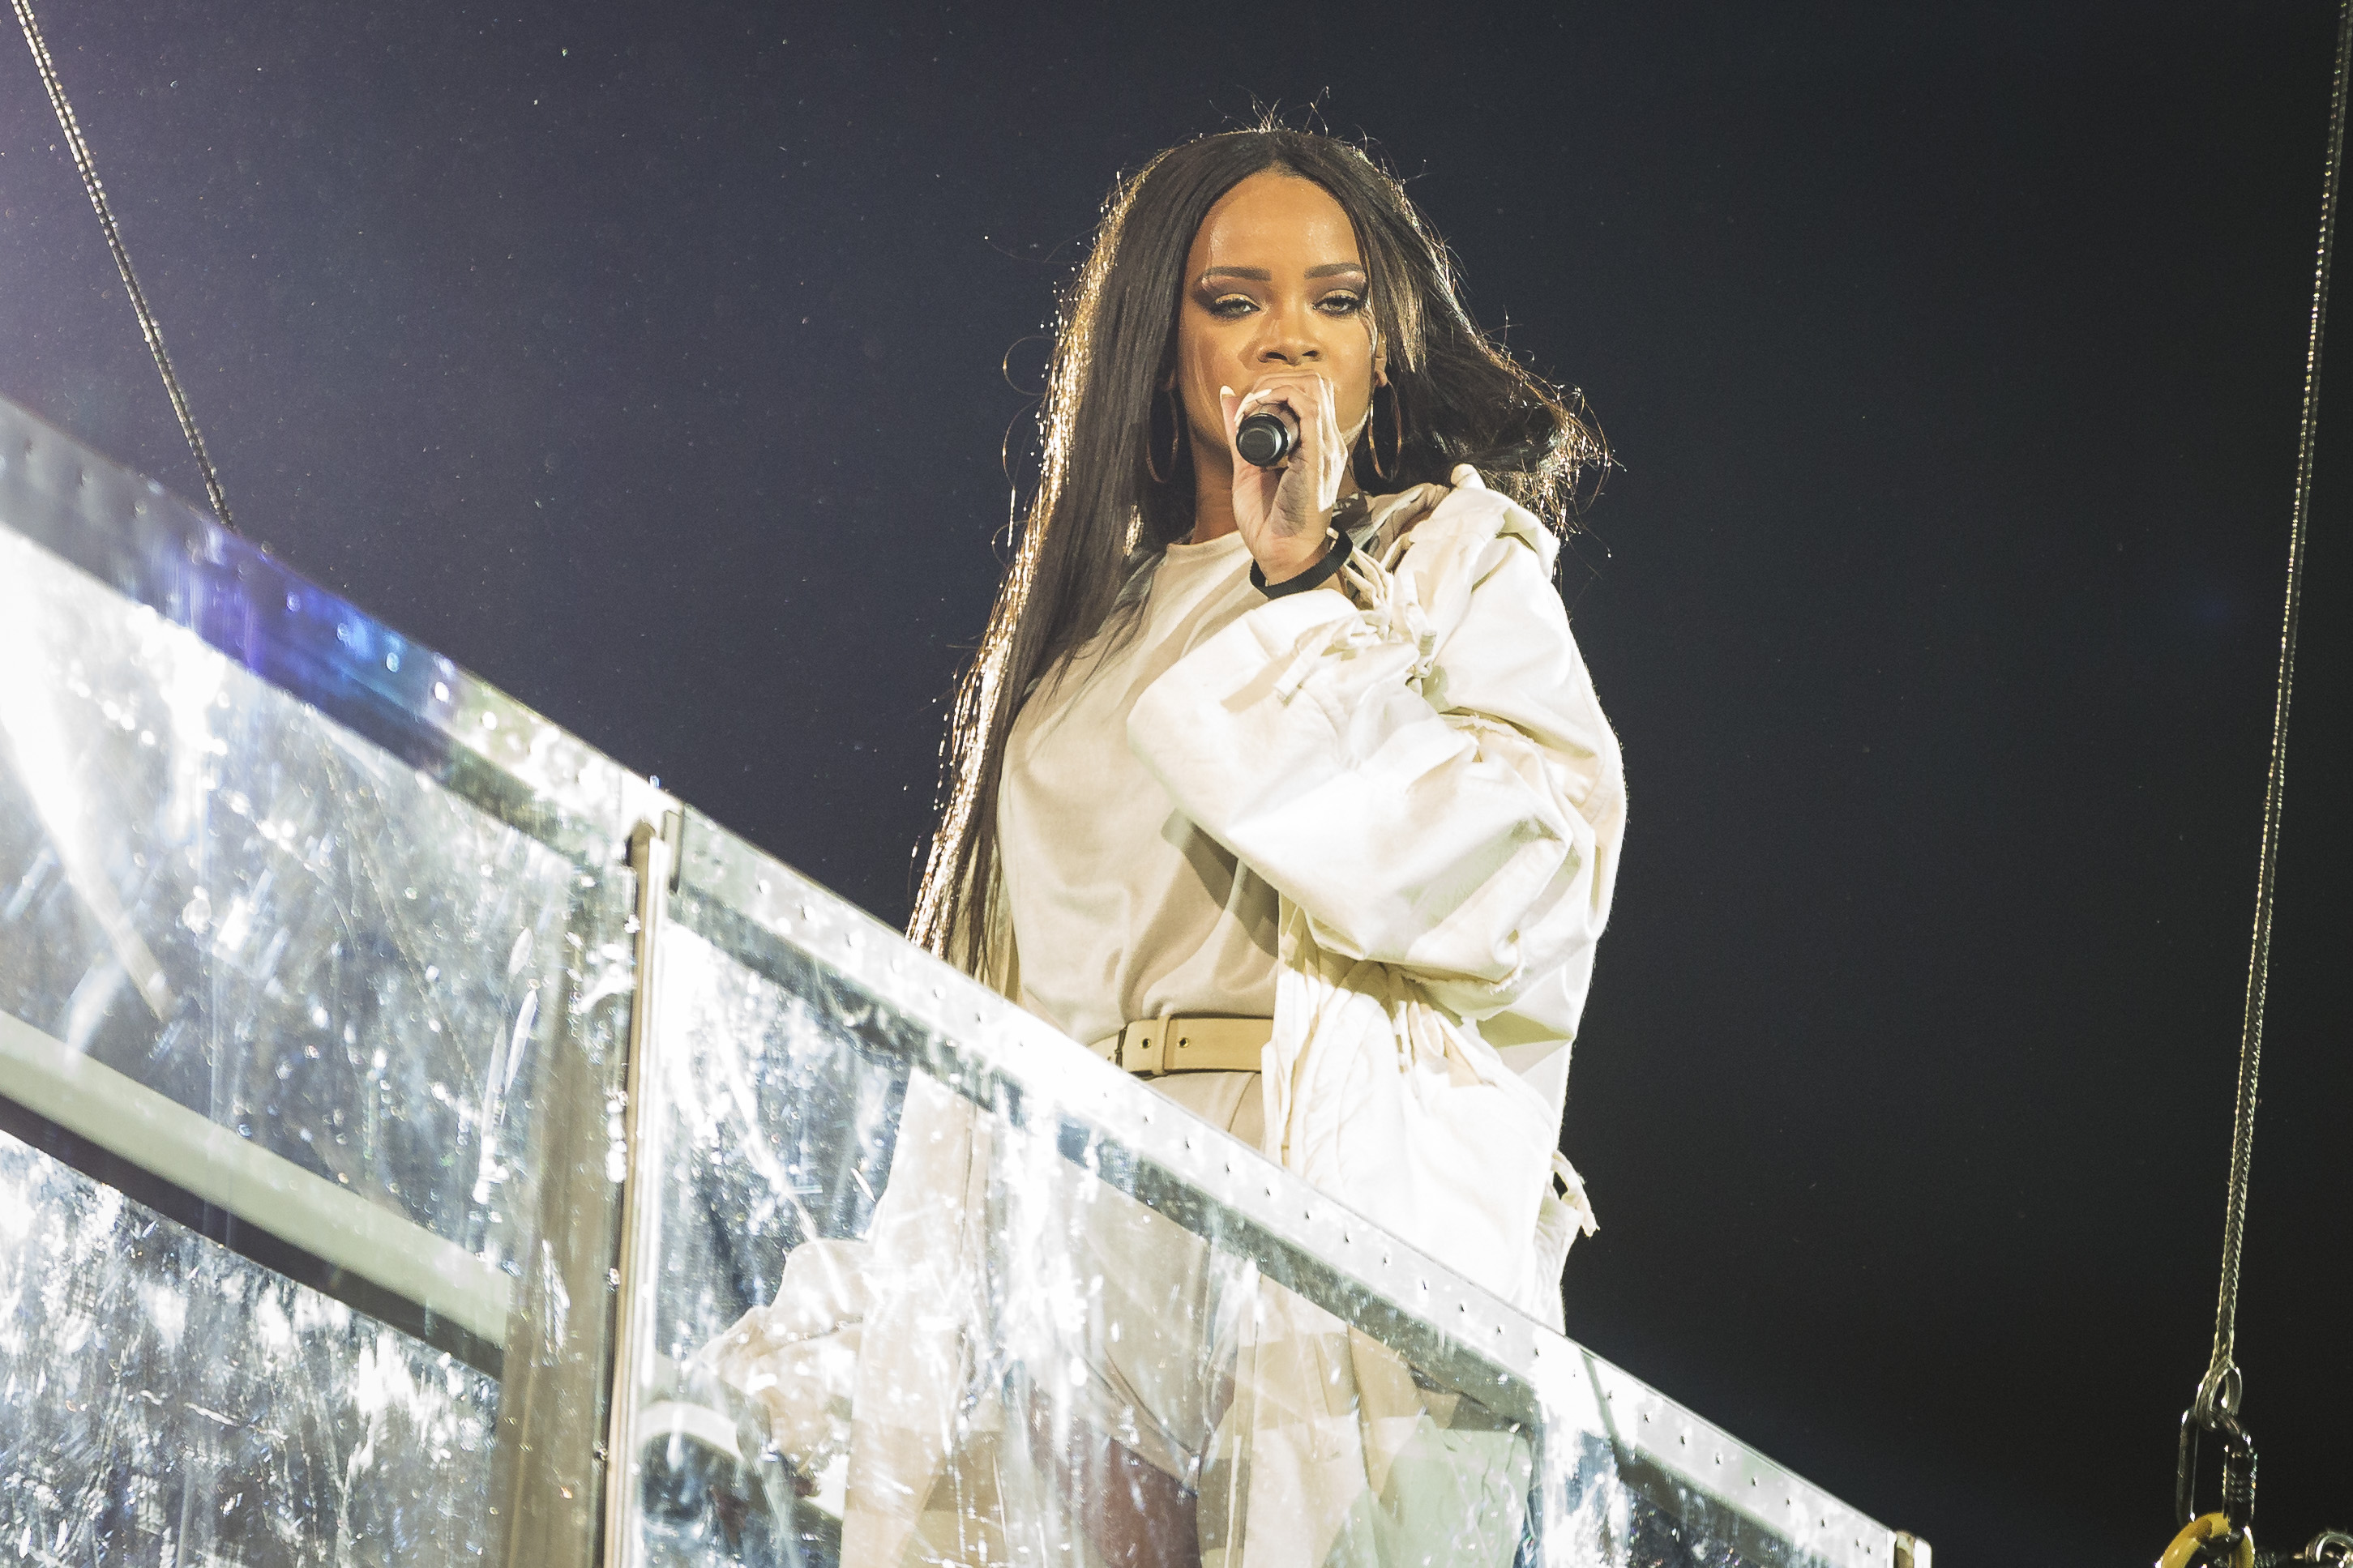 Rihanna Performs in Concert in Stockholm